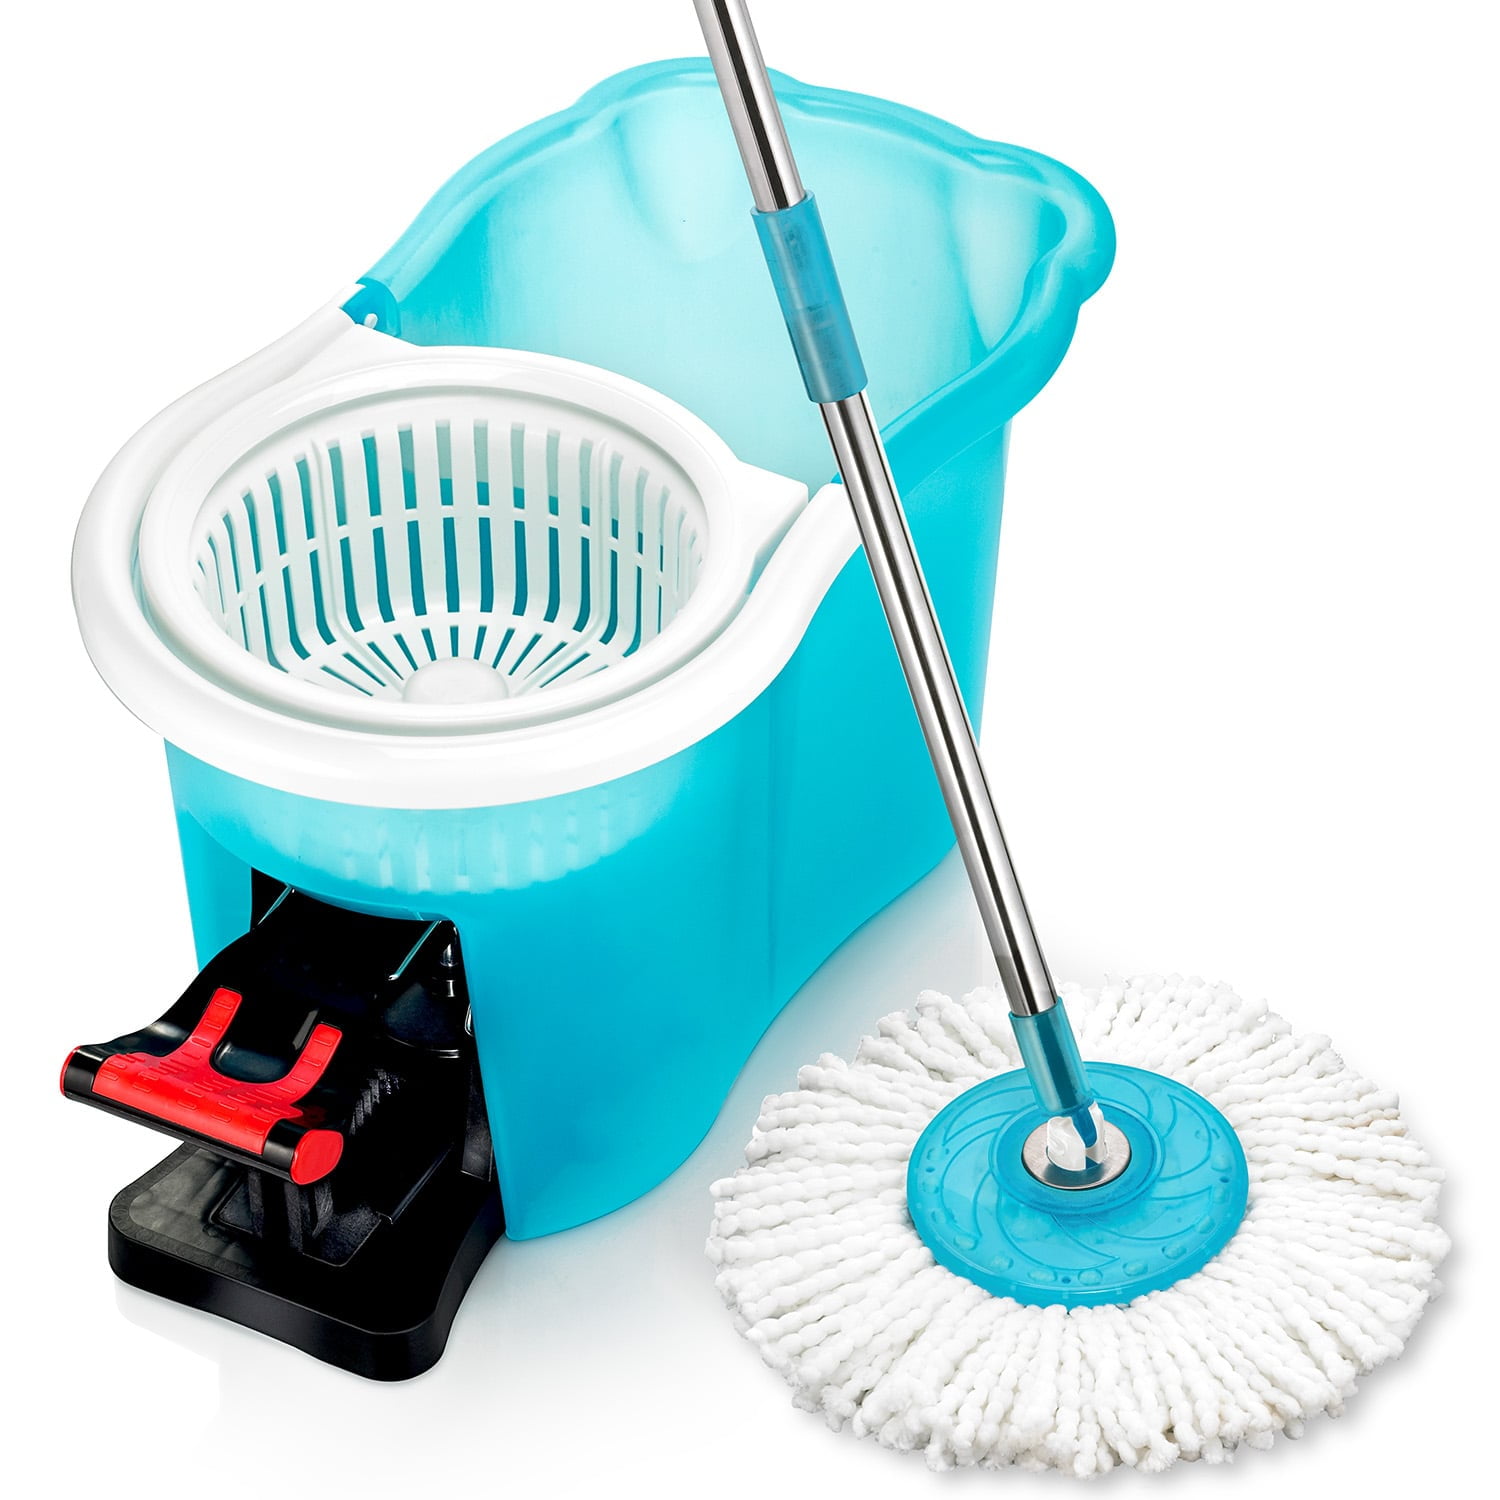 The Hurricane Spin Mop.